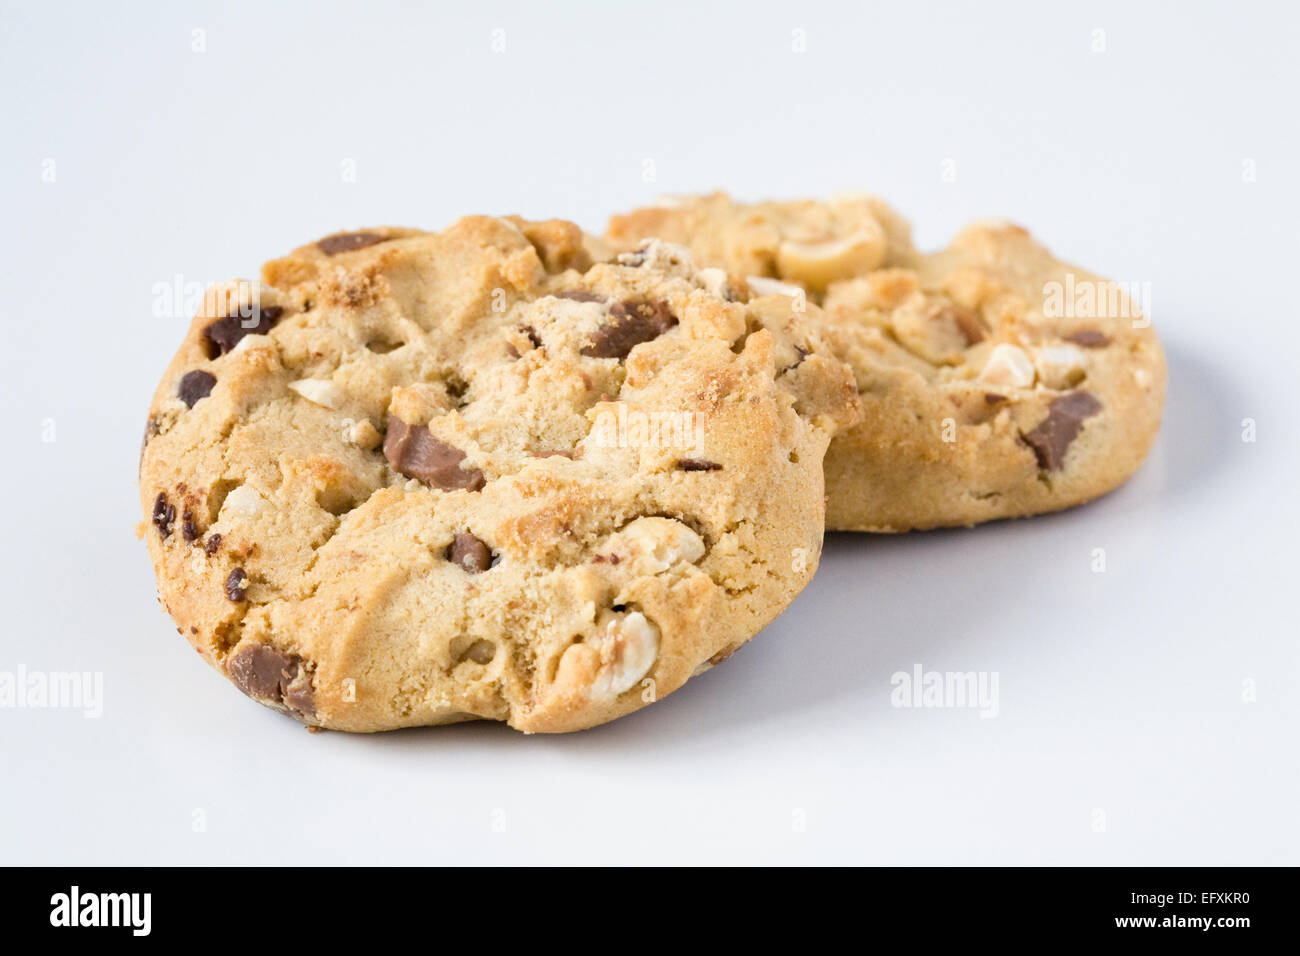 Two chocolate chip and nut cookies on a white background. Stock Photo